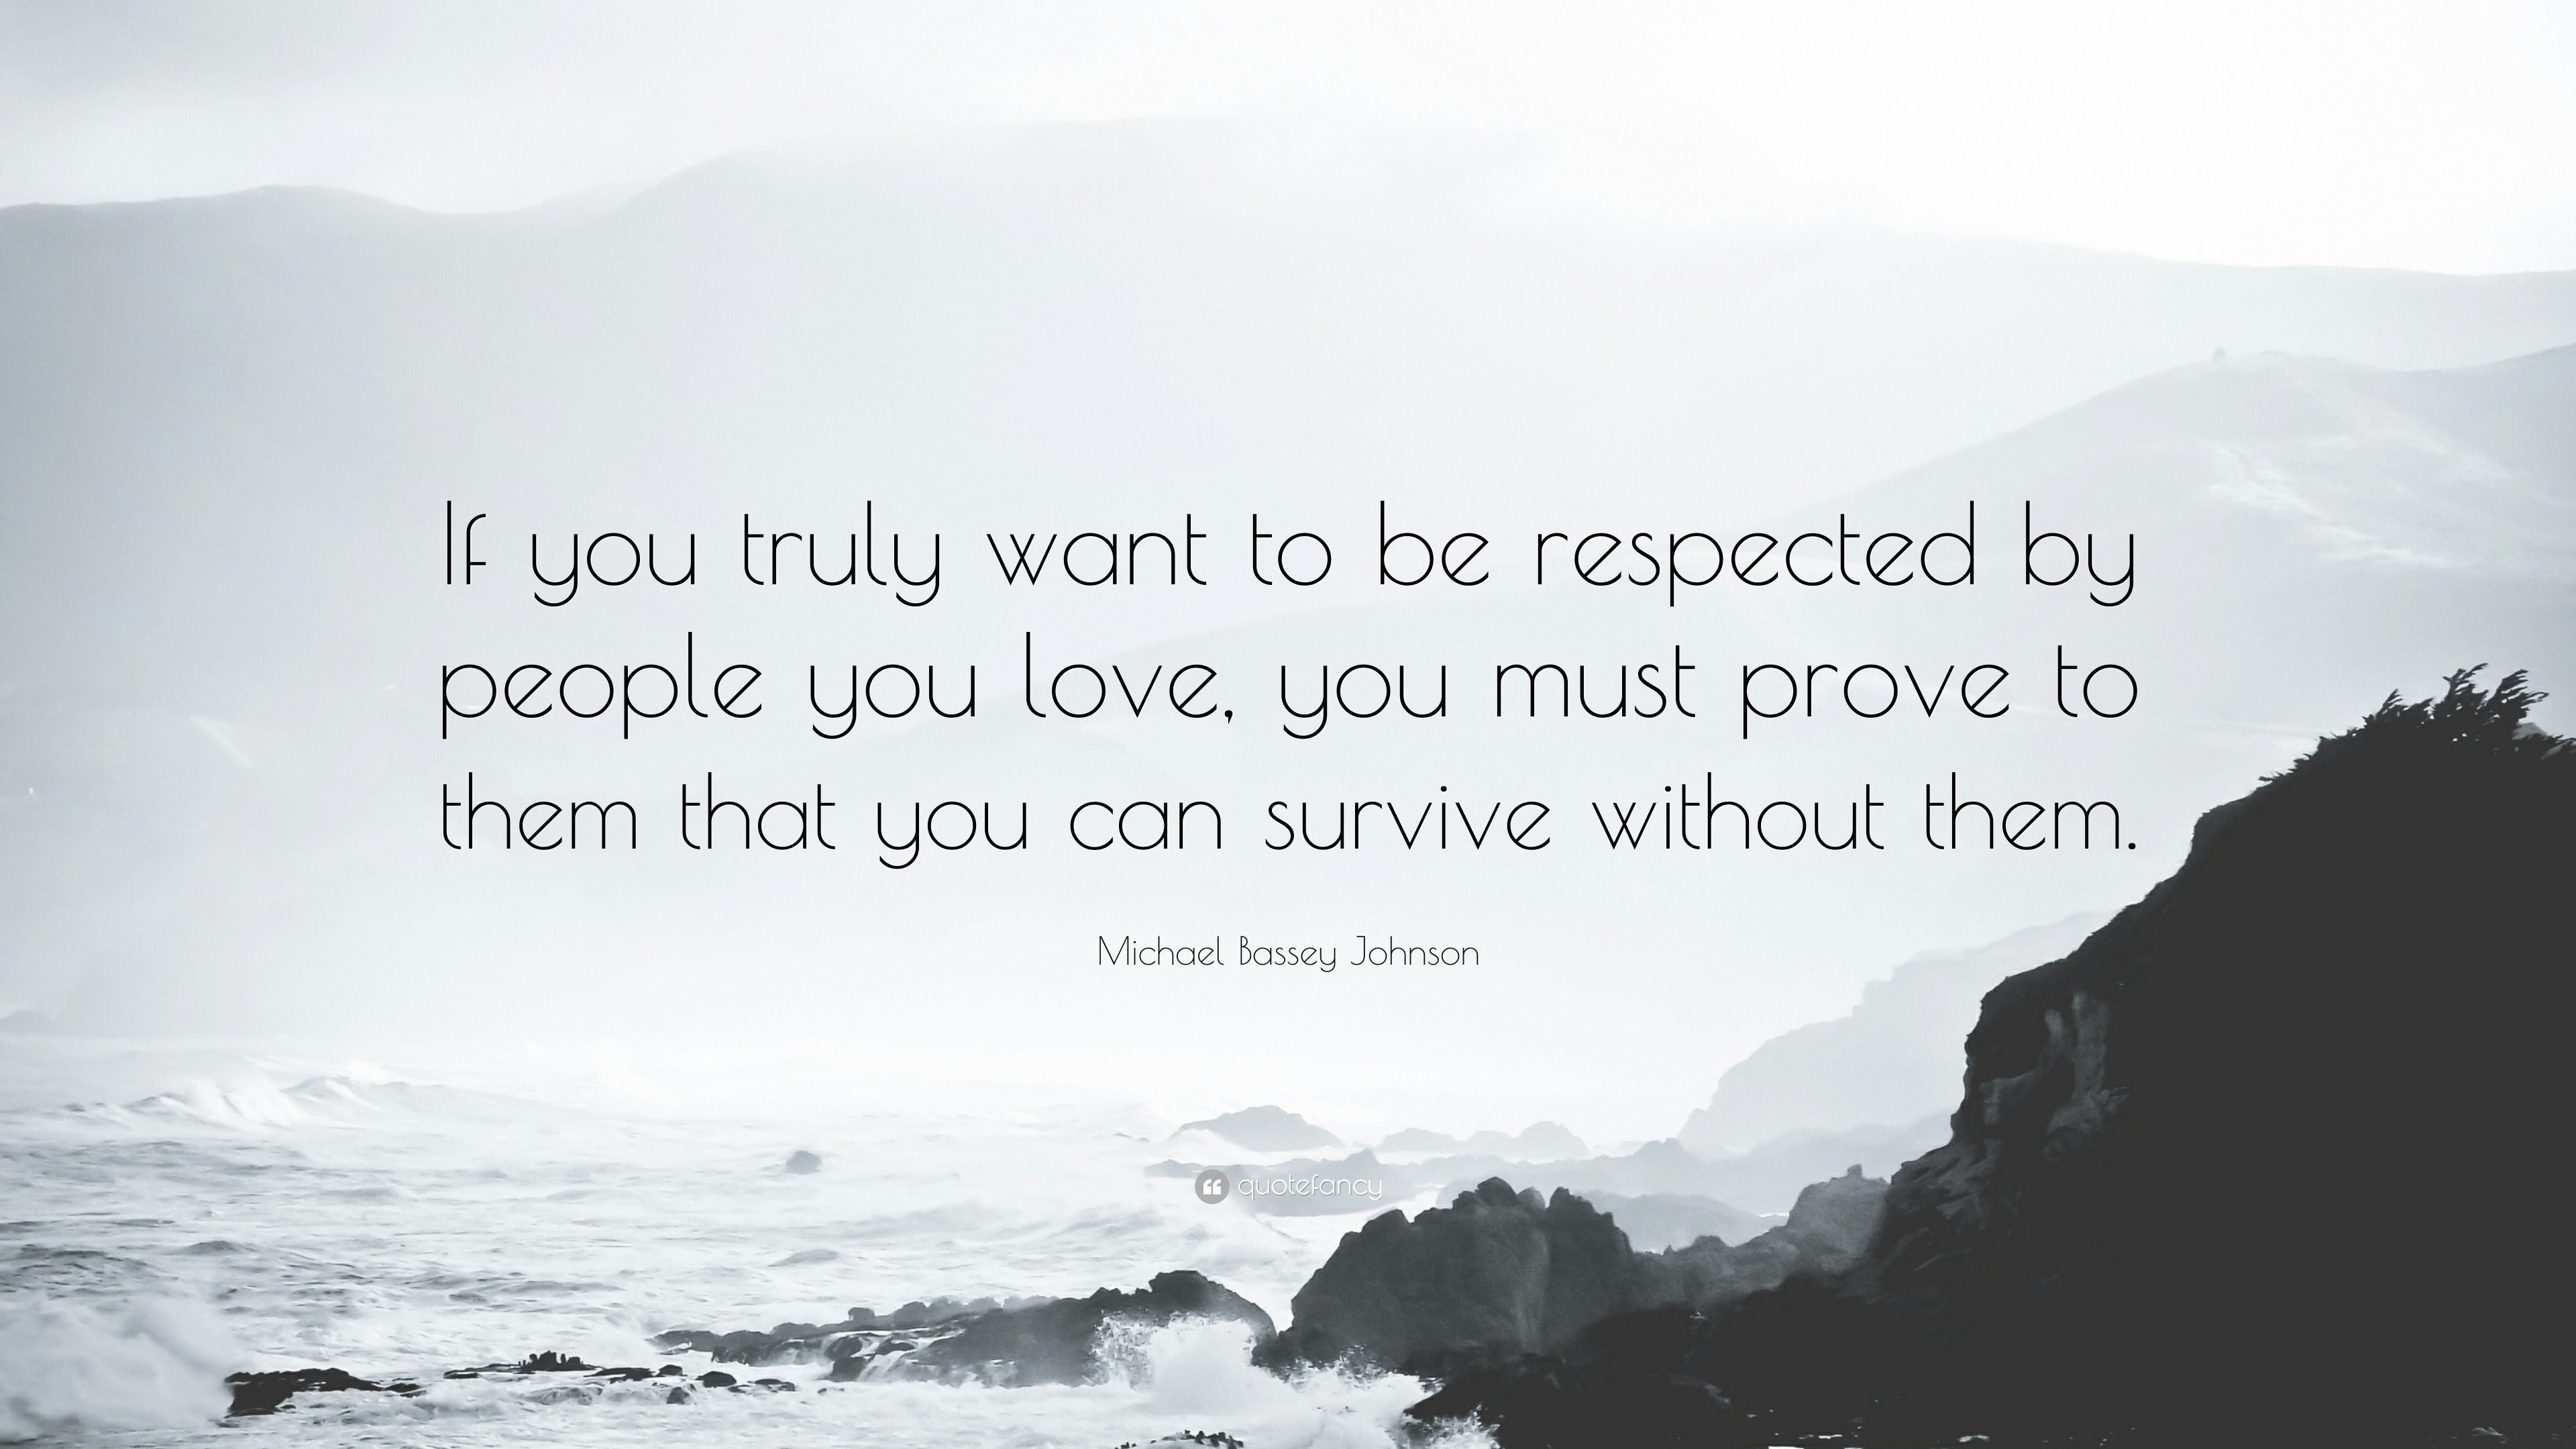 Michael Bassey Johnson Quote: “If You Truly Want To Be Respected By People You Love, You